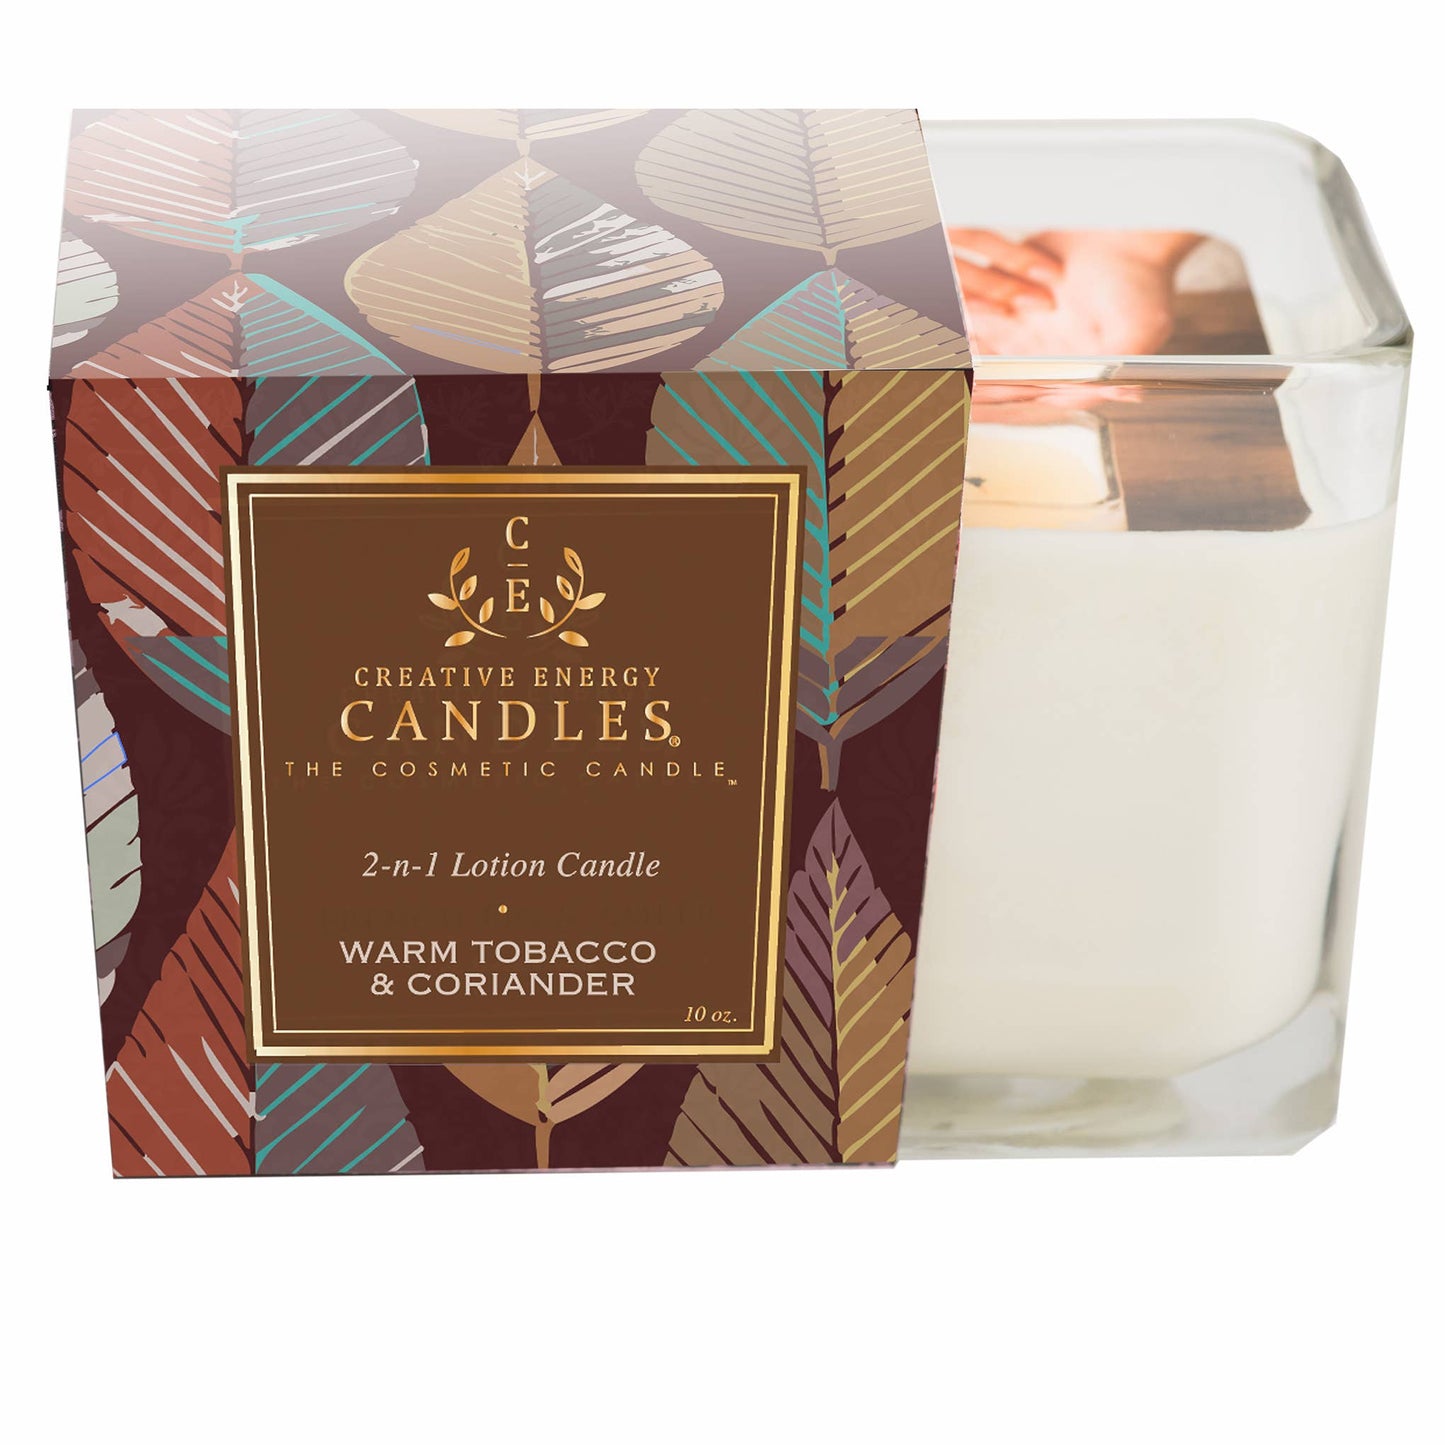 Creative Energy Candles - Warm Tobacco & Coriander: 2-in-1 Soy Lotion Candle: Medium - 6 oz